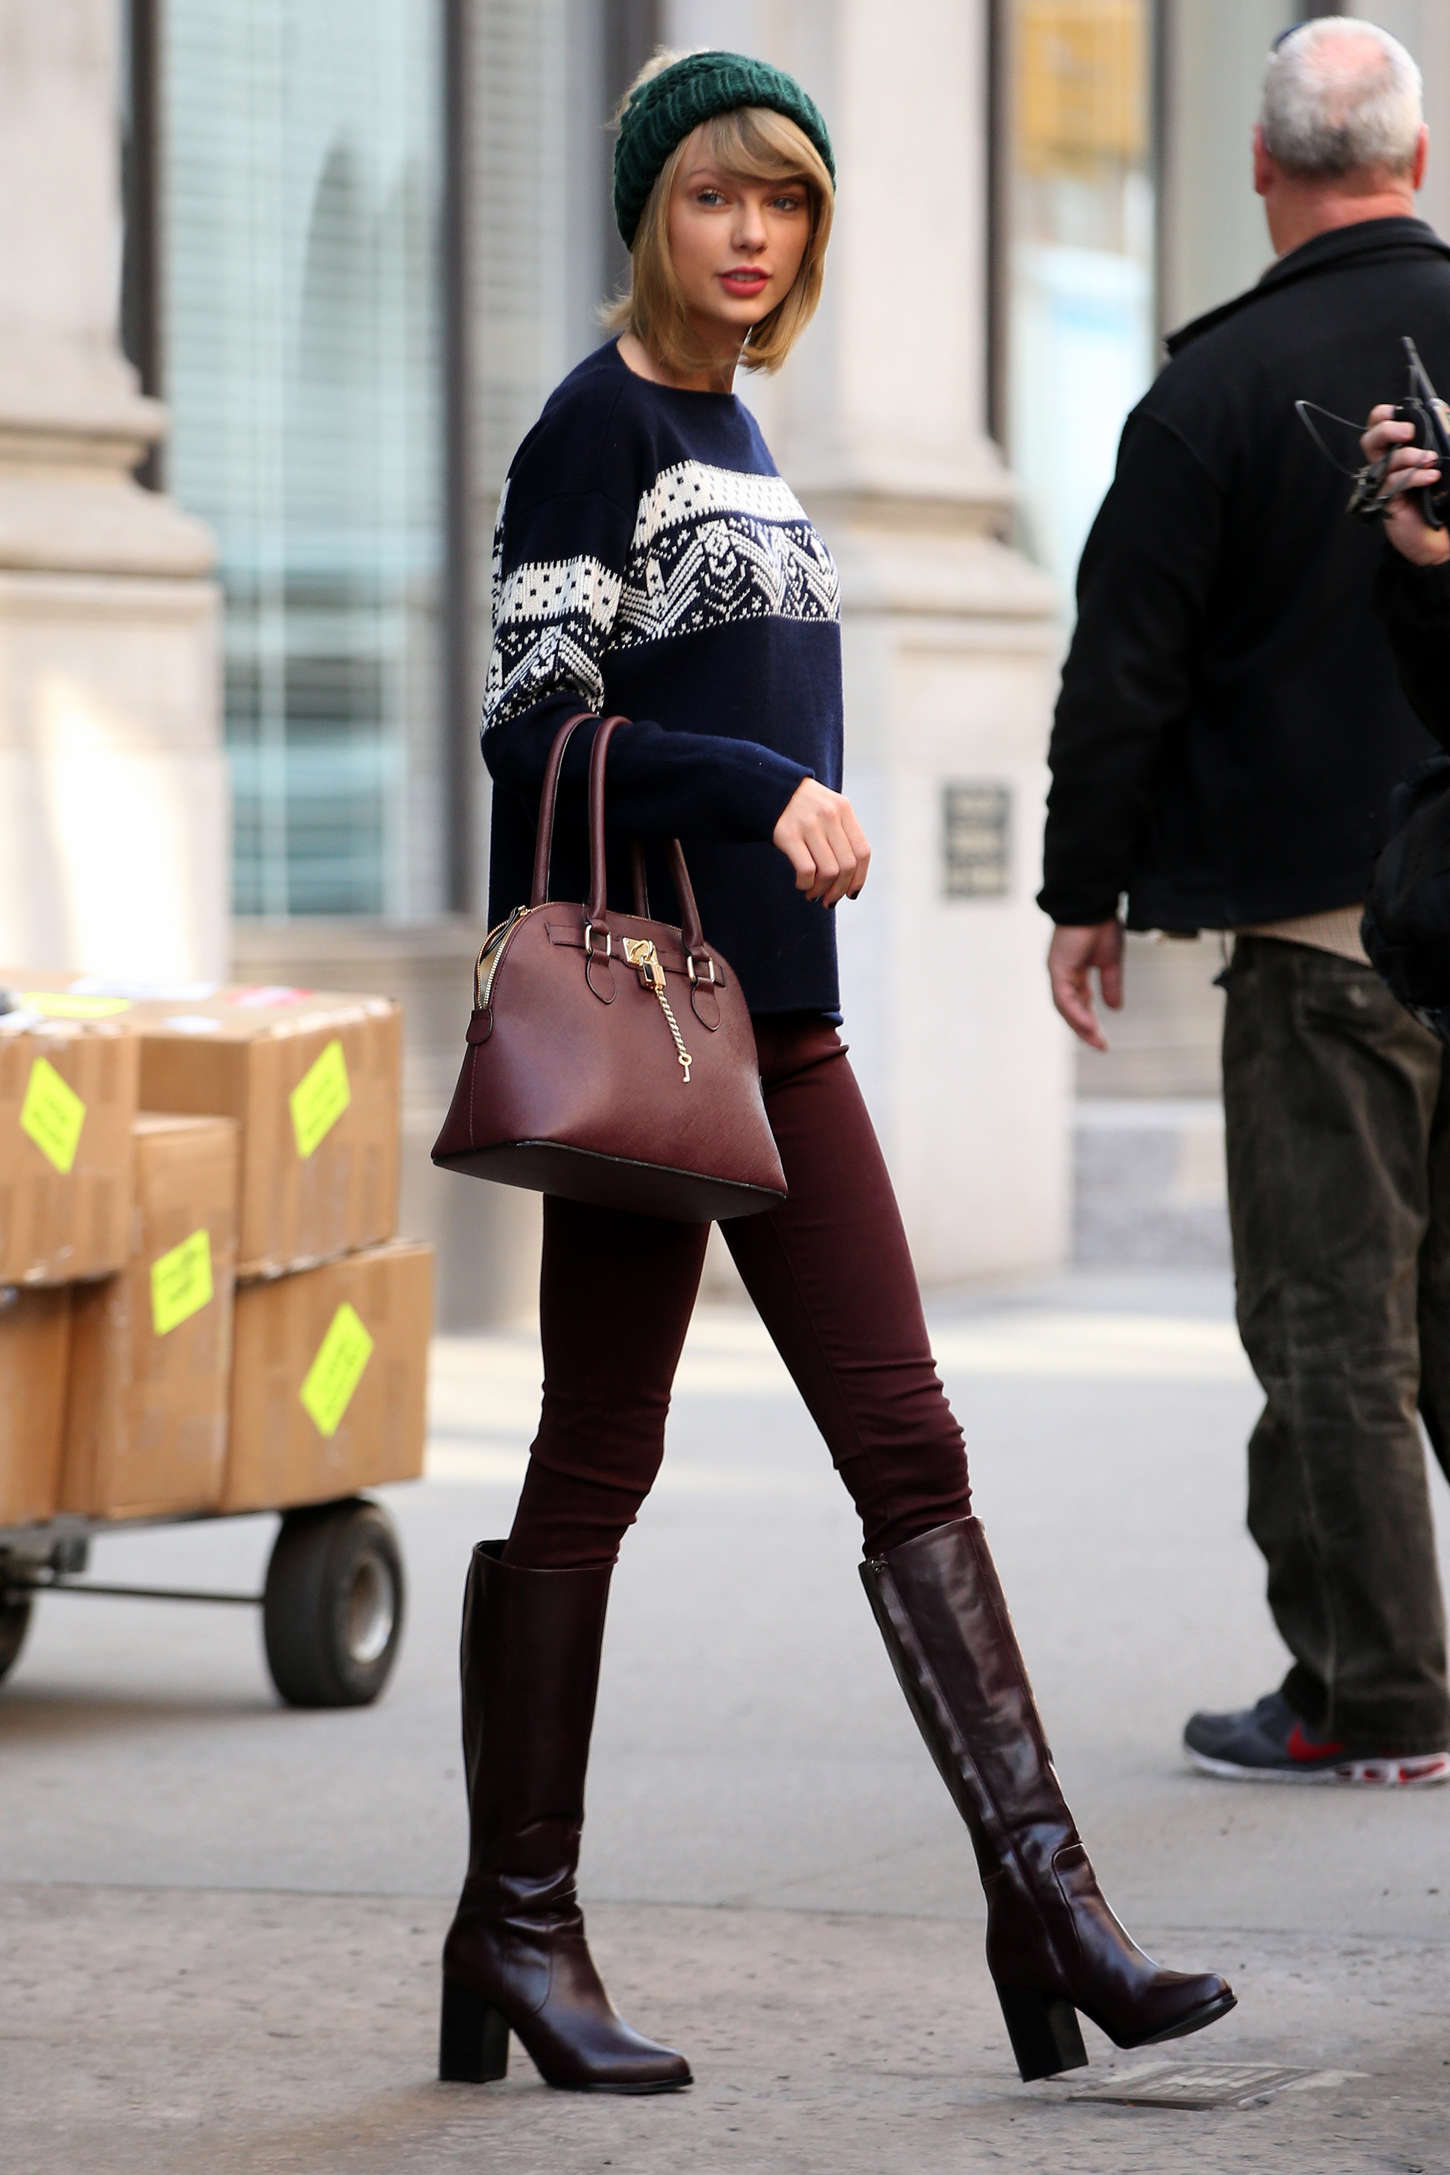 Taylor Swift in Tight Pants and Boots -05 – GotCeleb